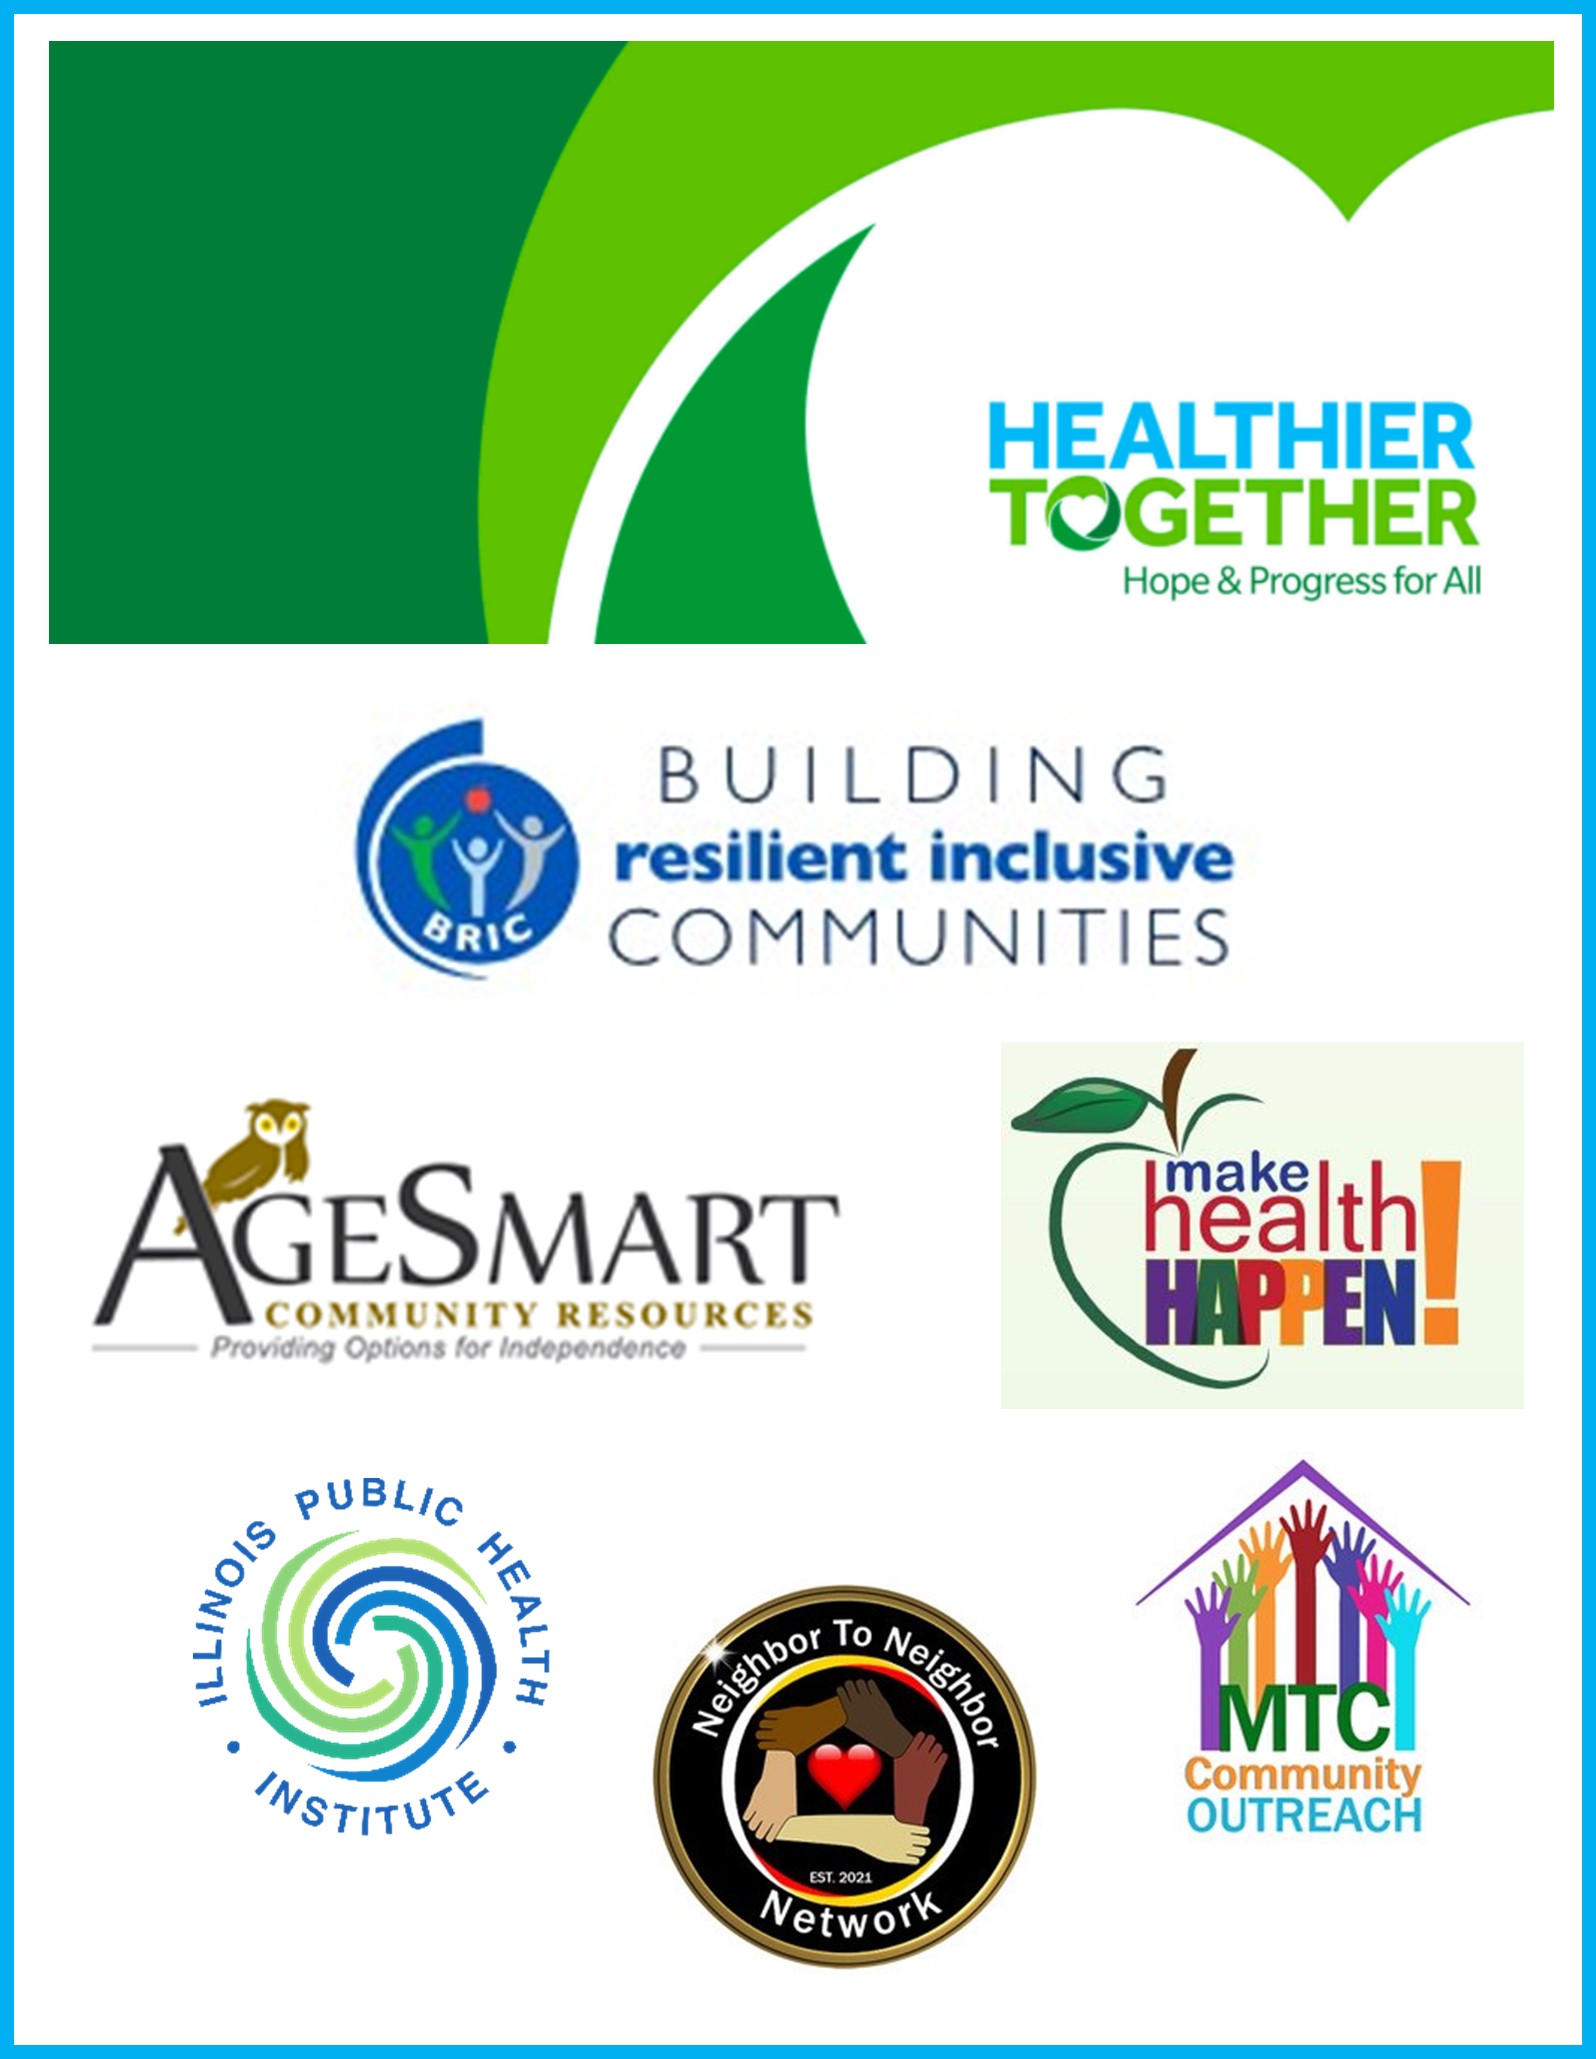 BRIC Group of HEALTHIER TOGETHER, seeking to transform St. Clair County, IL